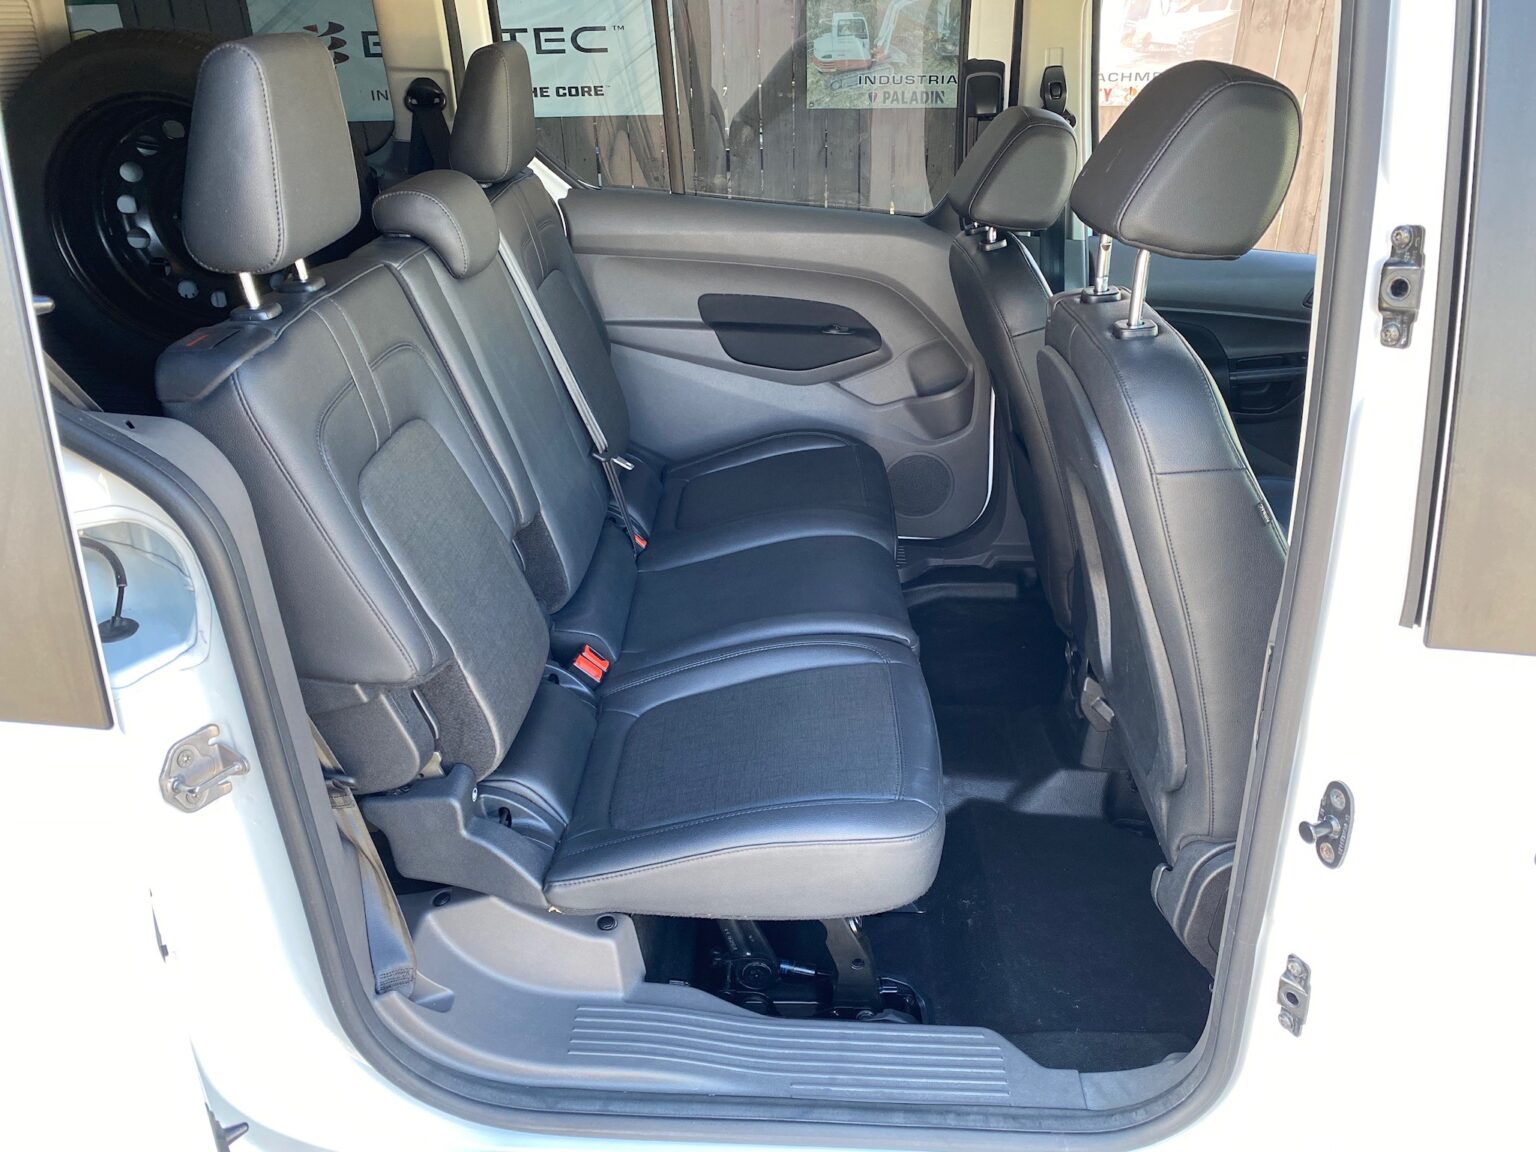 Ford Transit Connect Mobility Van